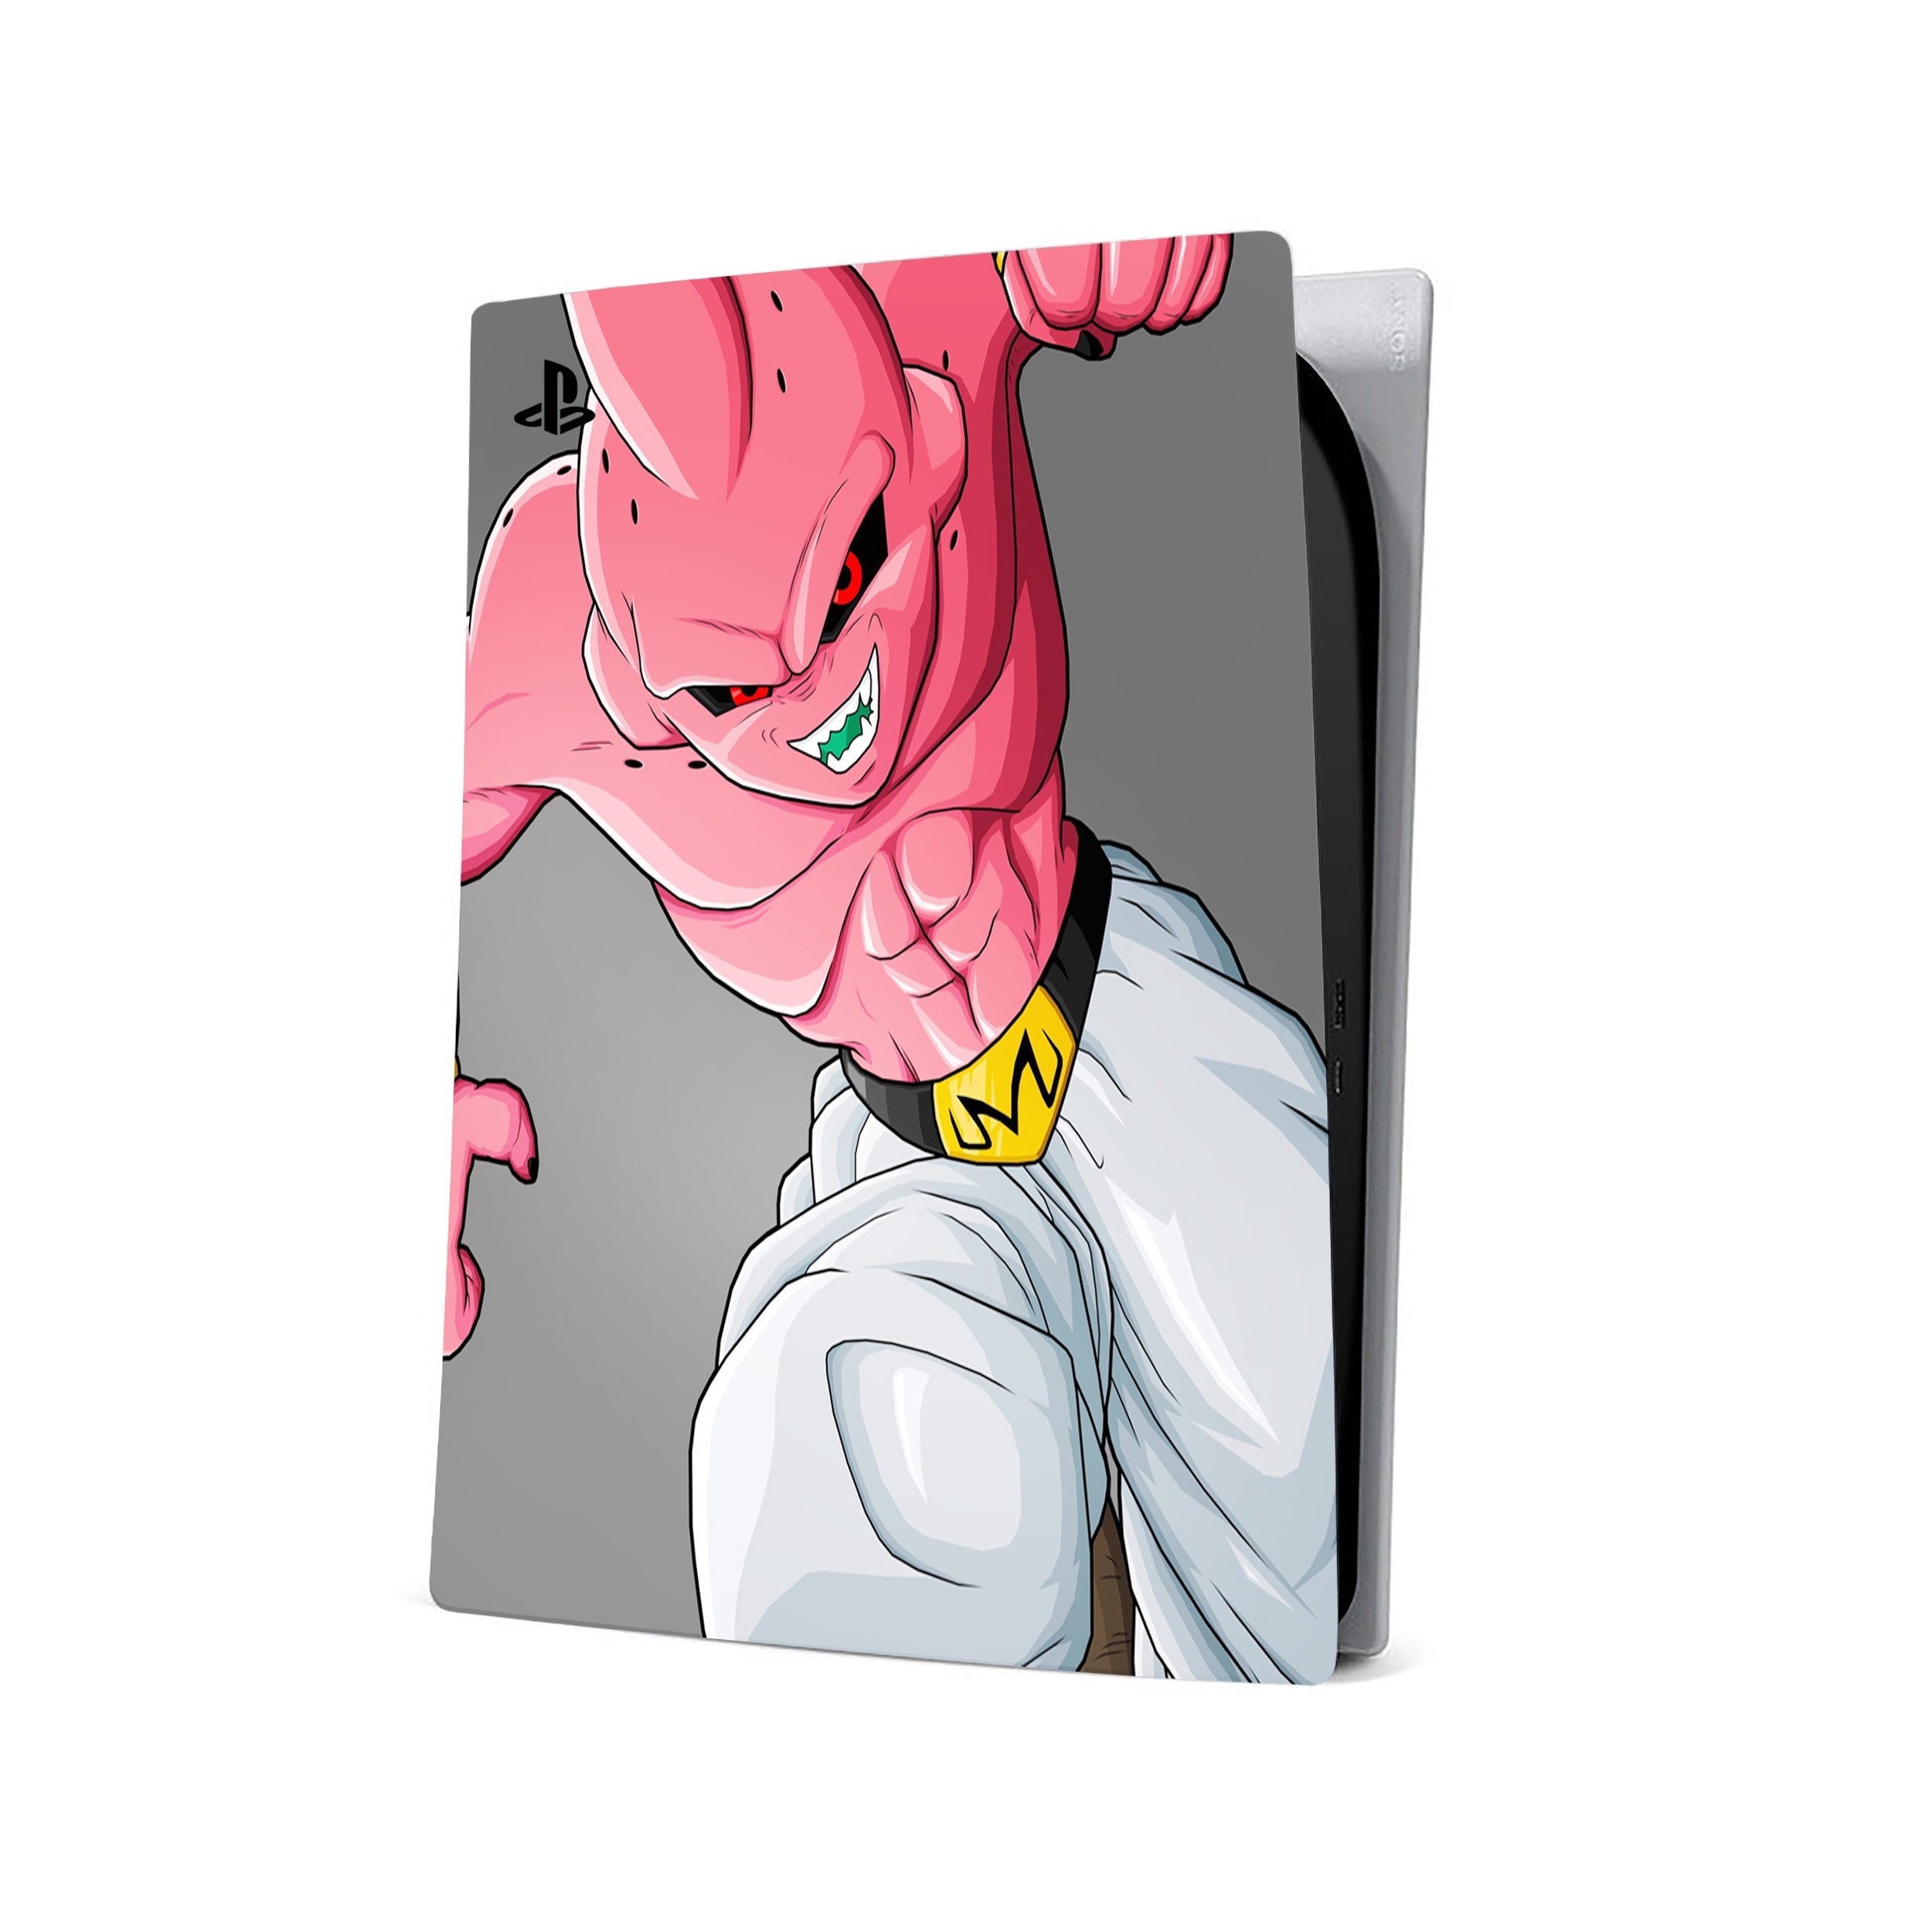 A video game skin featuring a Dragon Ball Z Majin Buu design for the PS5.